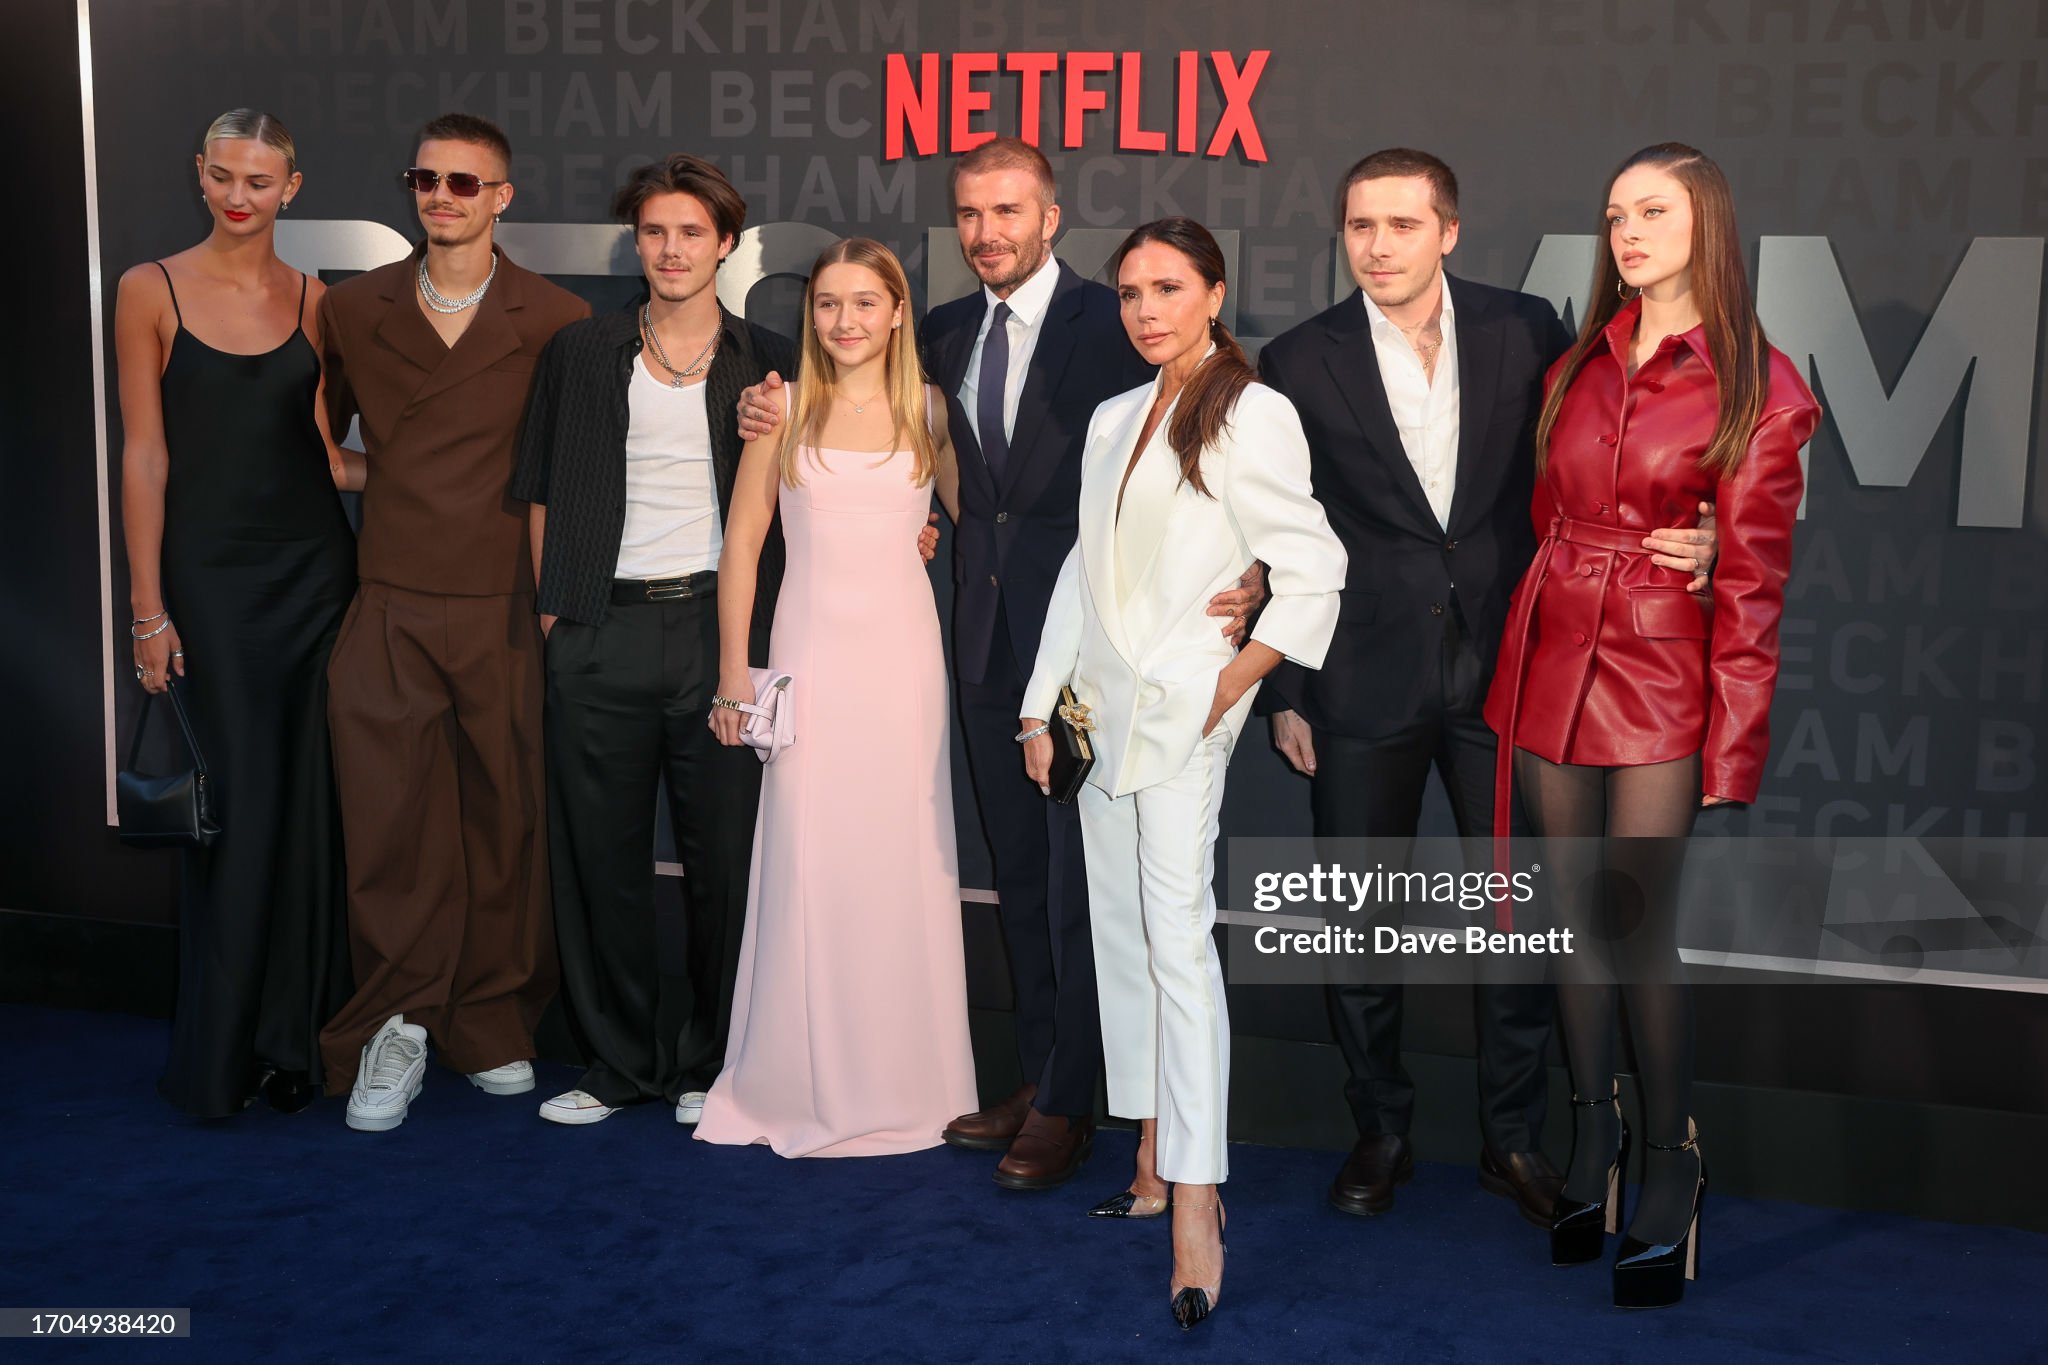 gettyimages-1704938420-2048x2048.jpg